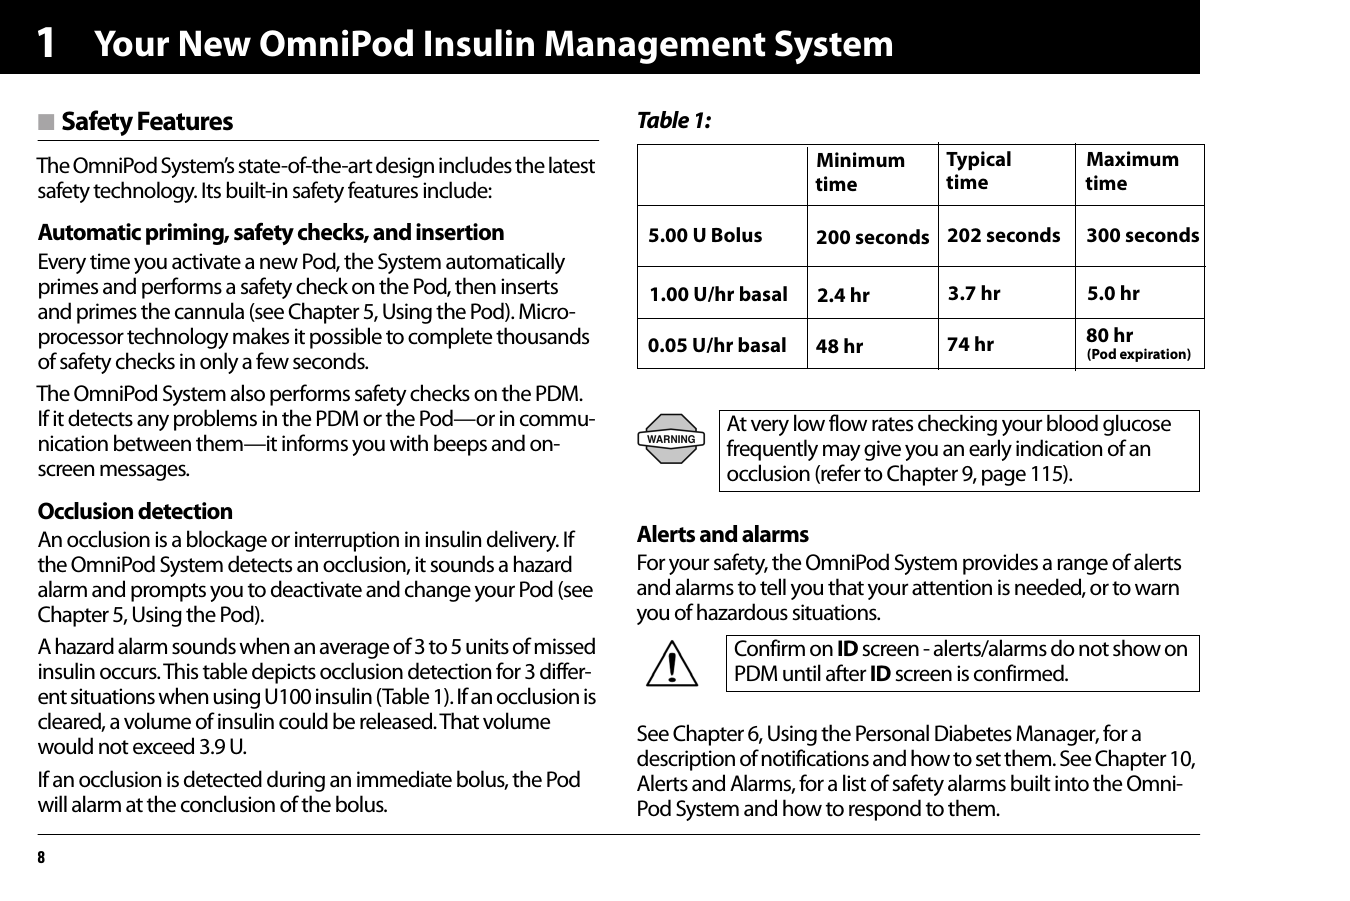 Your New OmniPod Insulin Management System81n Safety FeaturesThe OmniPod System’s state-of-the-art design includes the latest safety technology. Its built-in safety features include:Automatic priming, safety checks, and insertionEvery time you activate a new Pod, the System automatically primes and performs a safety check on the Pod, then inserts and primes the cannula (see Chapter 5, Using the Pod). Micro-processor technology makes it possible to complete thousands of safety checks in only a few seconds.The OmniPod System also performs safety checks on the PDM. If it detects any problems in the PDM or the Pod—or in commu-nication between them—it informs you with beeps and on-screen messages.Occlusion detectionAn occlusion is a blockage or interruption in insulin delivery. If the OmniPod System detects an occlusion, it sounds a hazard alarm and prompts you to deactivate and change your Pod (see Chapter 5, Using the Pod).A hazard alarm sounds when an average of 3 to 5 units of missed insulin occurs. This table depicts occlusion detection for 3 differ-ent situations when using U100 insulin (Table 1). If an occlusion is cleared, a volume of insulin could be released. That volume would not exceed 3.9 U.If an occlusion is detected during an immediate bolus, the Pod will alarm at the conclusion of the bolus. Table 1:Alerts and alarmsFor your safety, the OmniPod System provides a range of alerts and alarms to tell you that your attention is needed, or to warn you of hazardous situations.See Chapter 6, Using the Personal Diabetes Manager, for a description of notifications and how to set them. See Chapter 10, Alerts and Alarms, for a list of safety alarms built into the Omni-Pod System and how to respond to them.At very low flow rates checking your blood glucose frequently may give you an early indication of an occlusion (refer to Chapter 9, page 115).Confirm on ID screen - alerts/alarms do not show on PDM until after ID screen is confirmed.5.00 U Bolus1.00 U/hr basal0.05 U/hr basal200 seconds2.4 hr48 hrMinimumtime202 seconds3.7 hr74 hrTypicaltime300 seconds5.0 hr80 hrMaximumtime(Pod expiration)